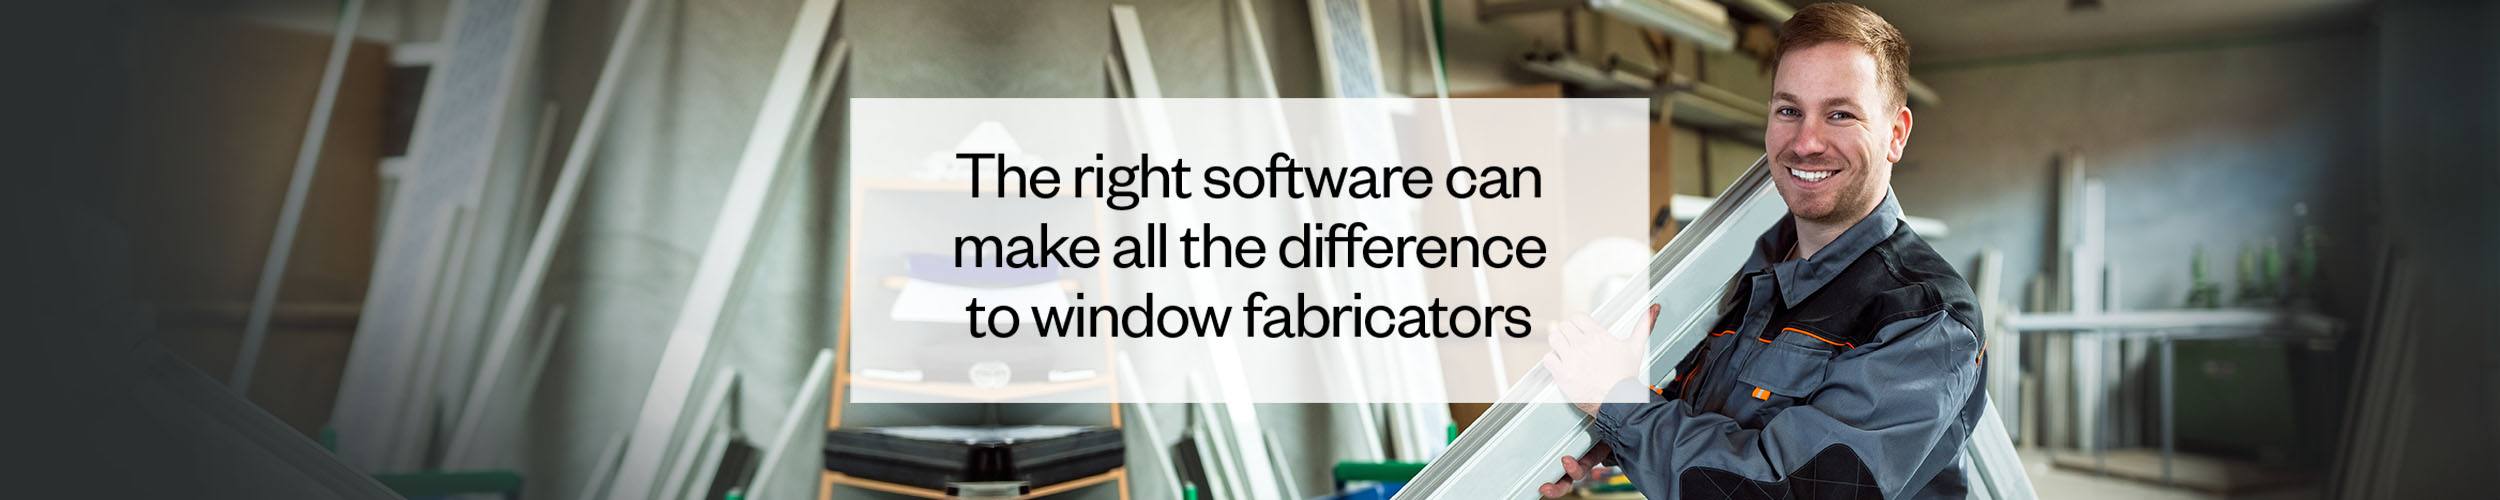 The right software for window fabricators